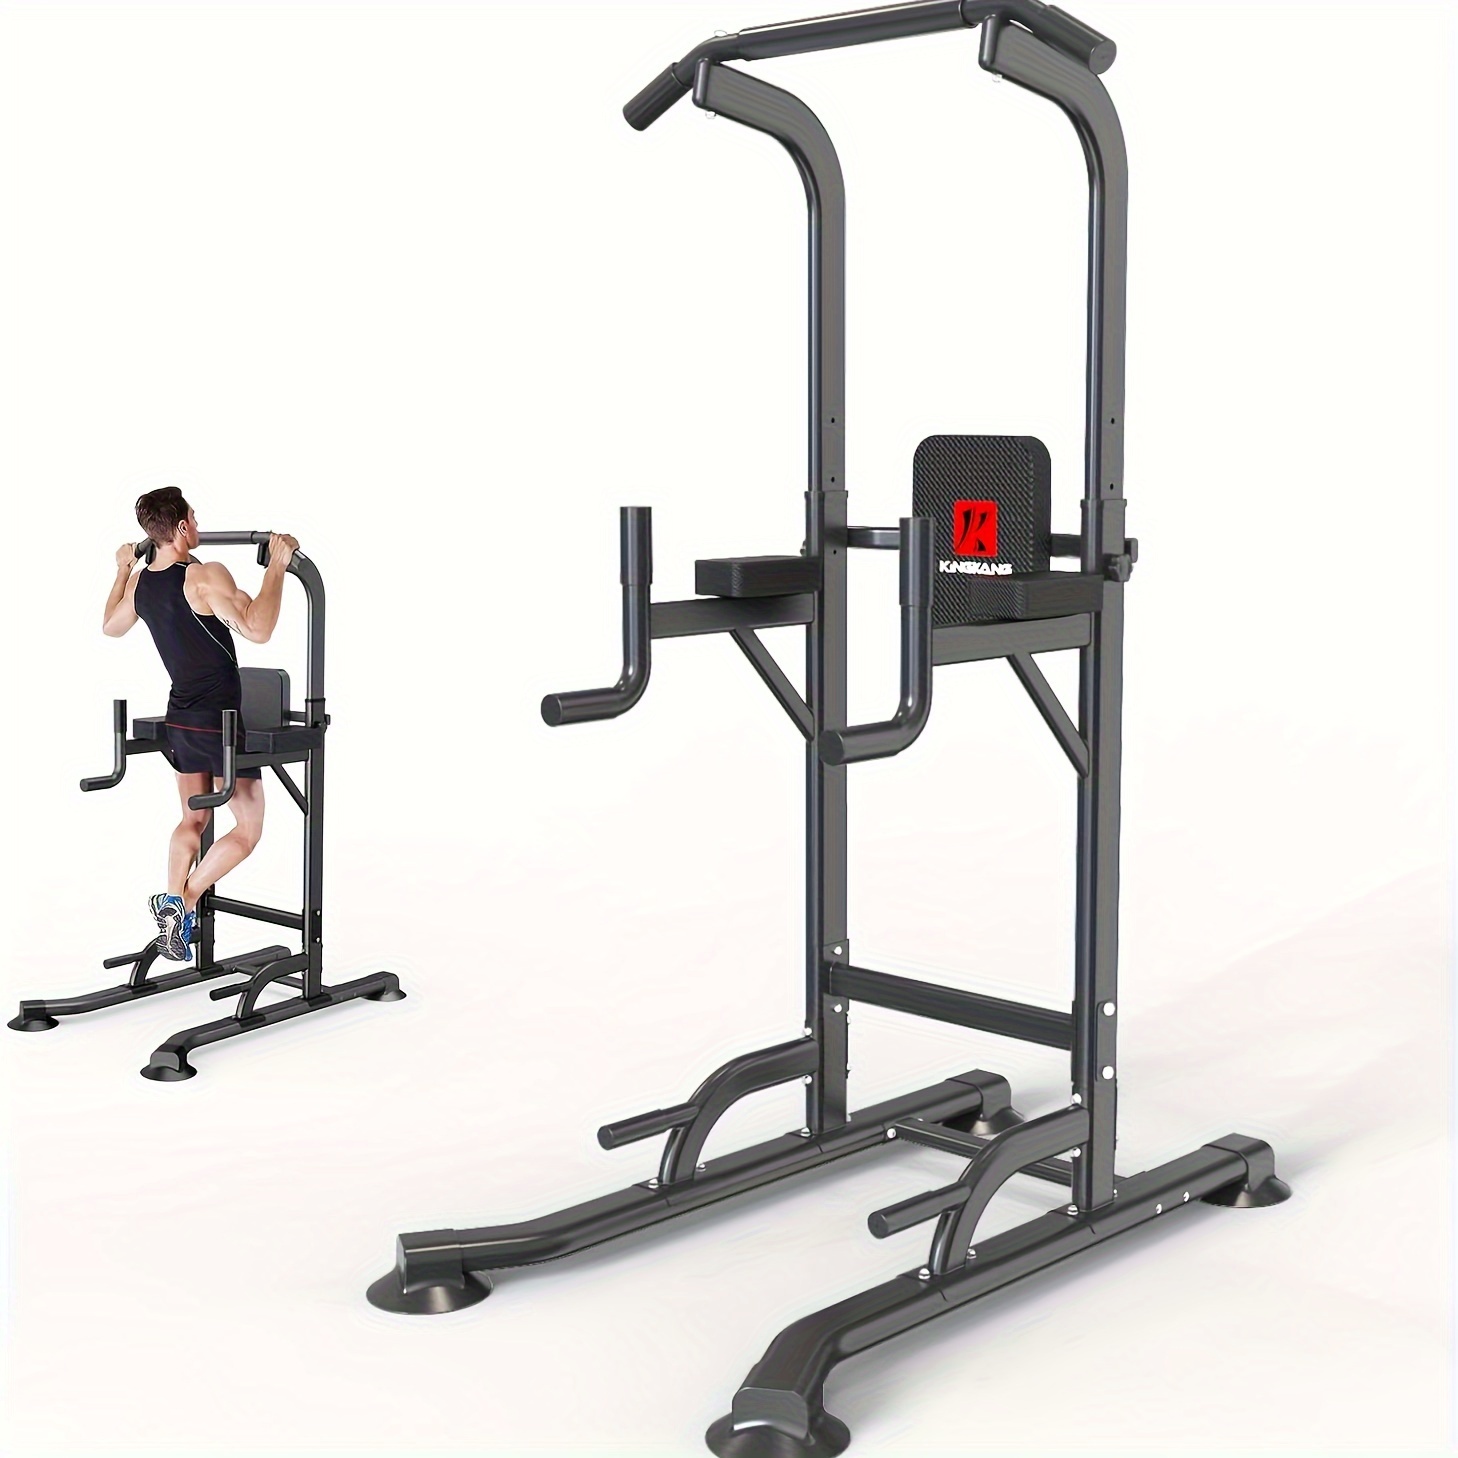 Power Tower Pull Up Bar Dip Station Adjustable Height Strength